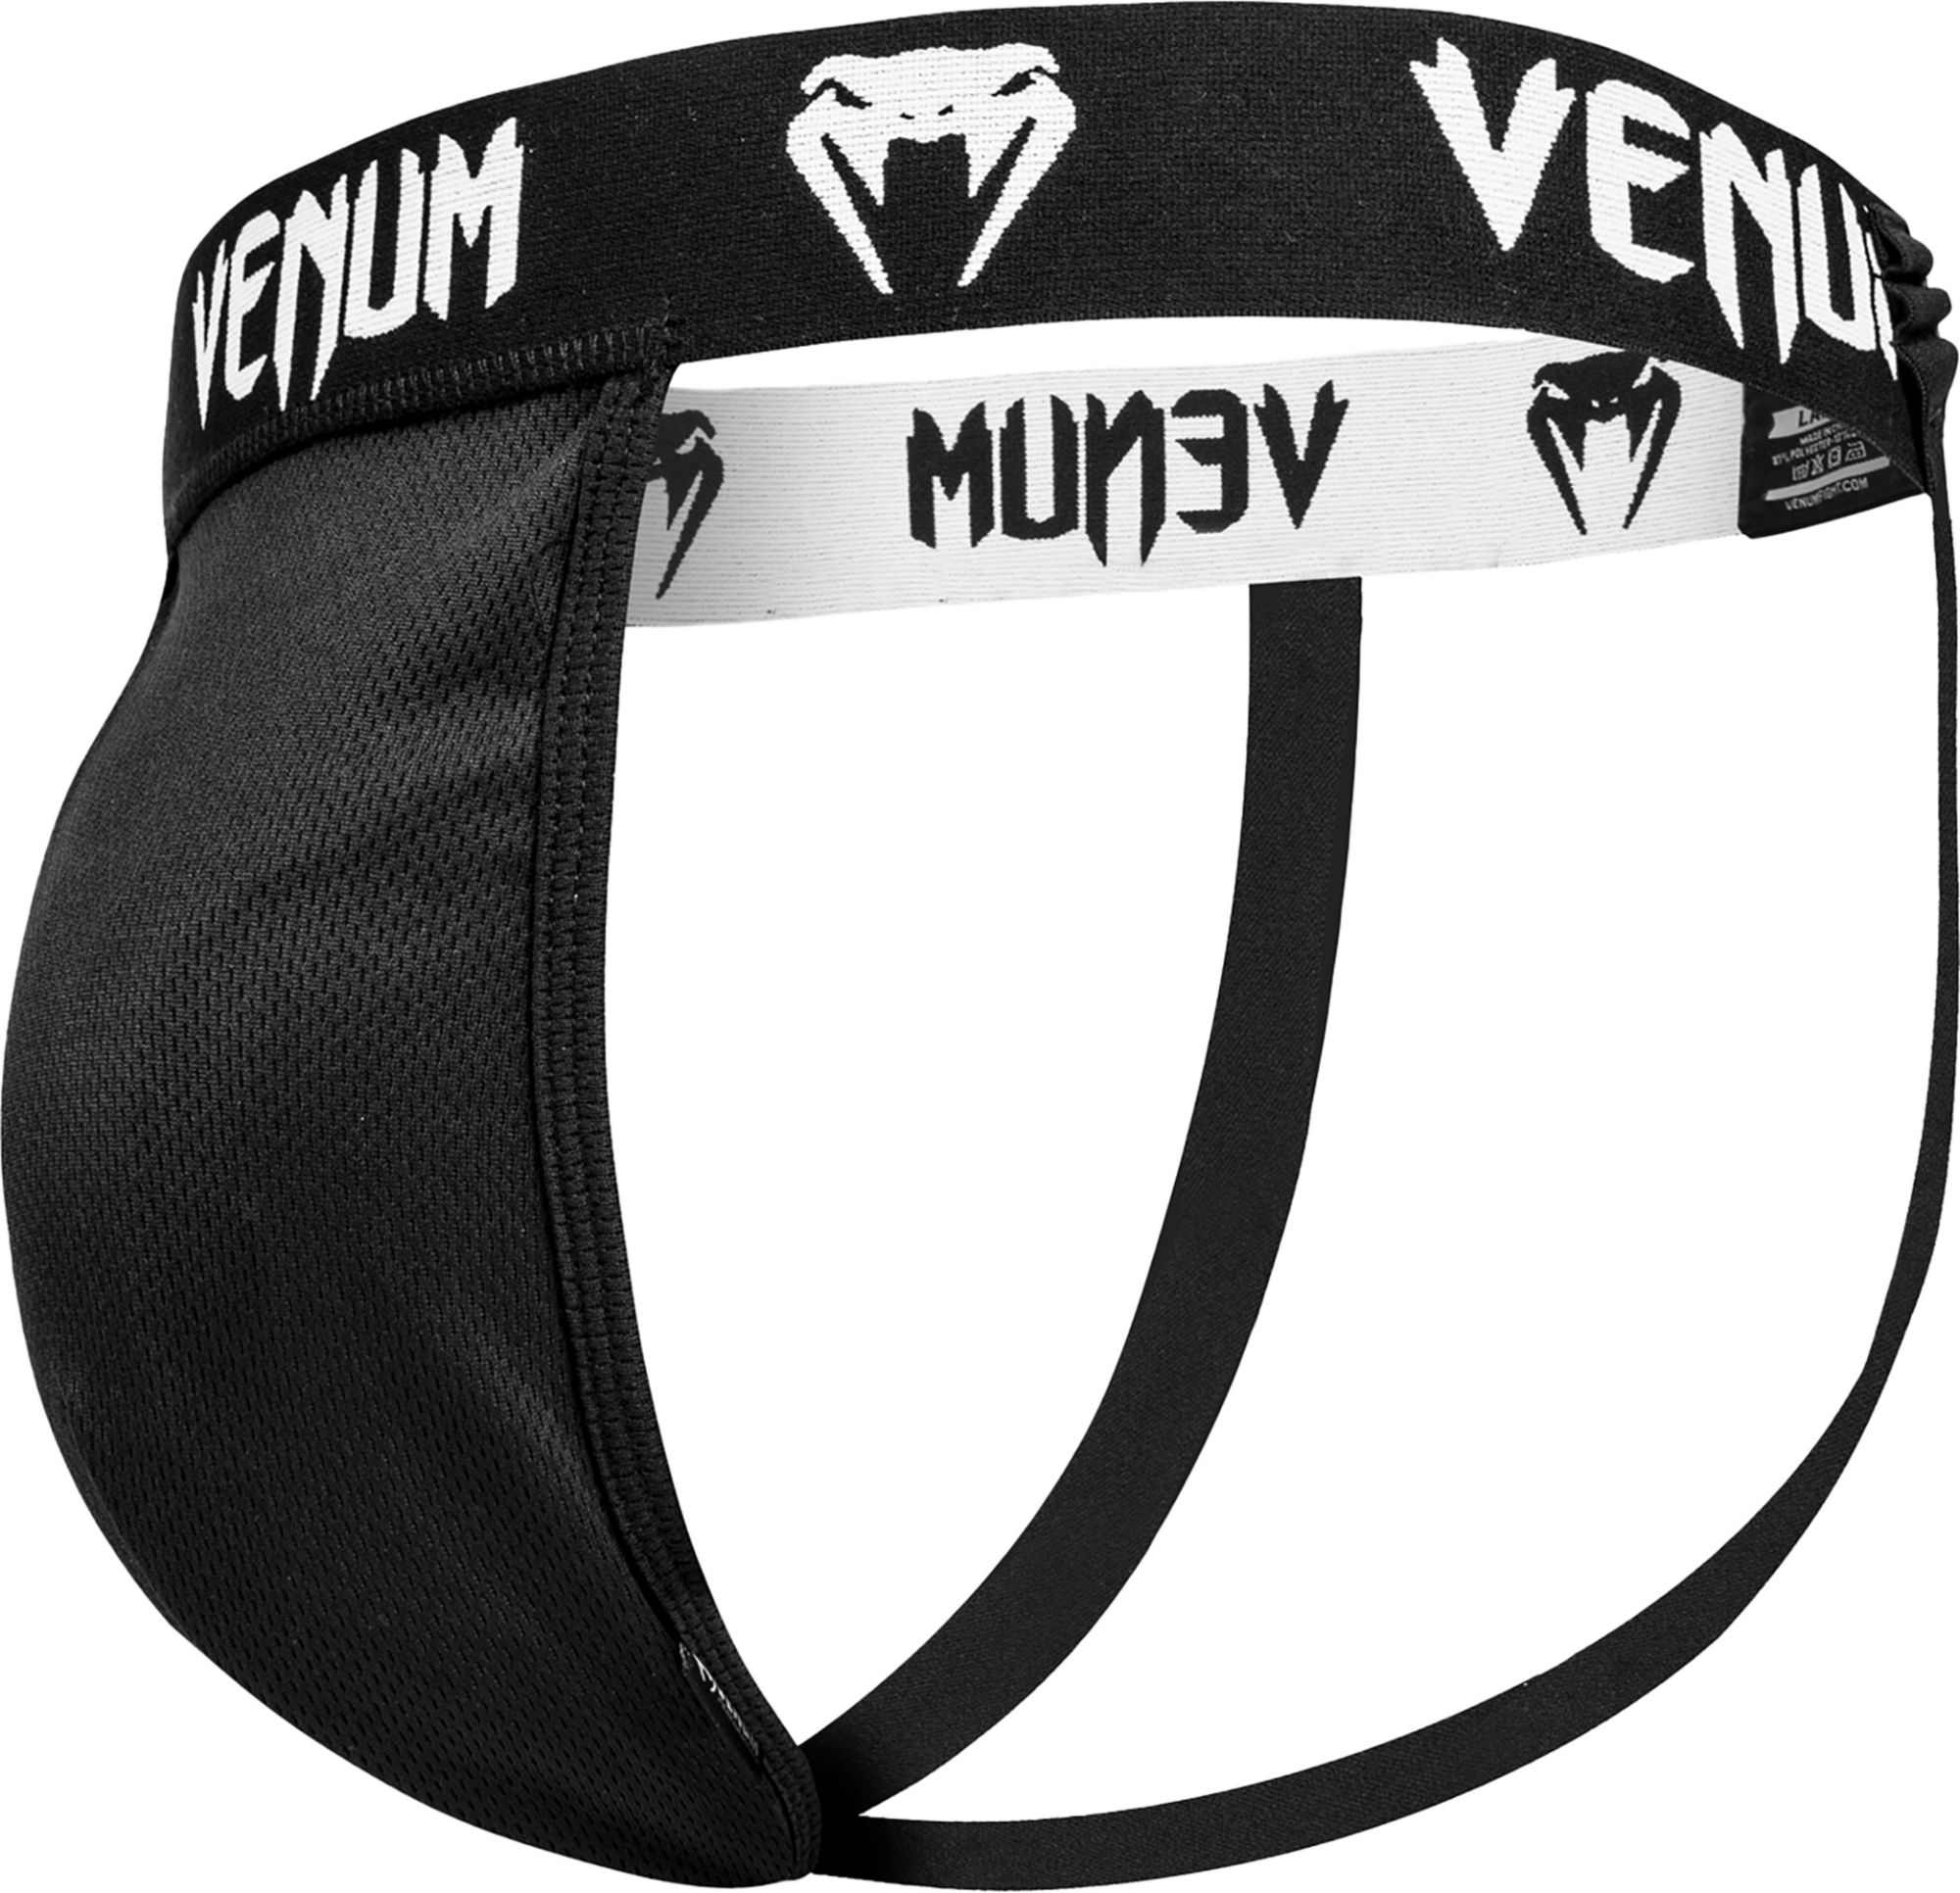 Venum Groin Guard and Support